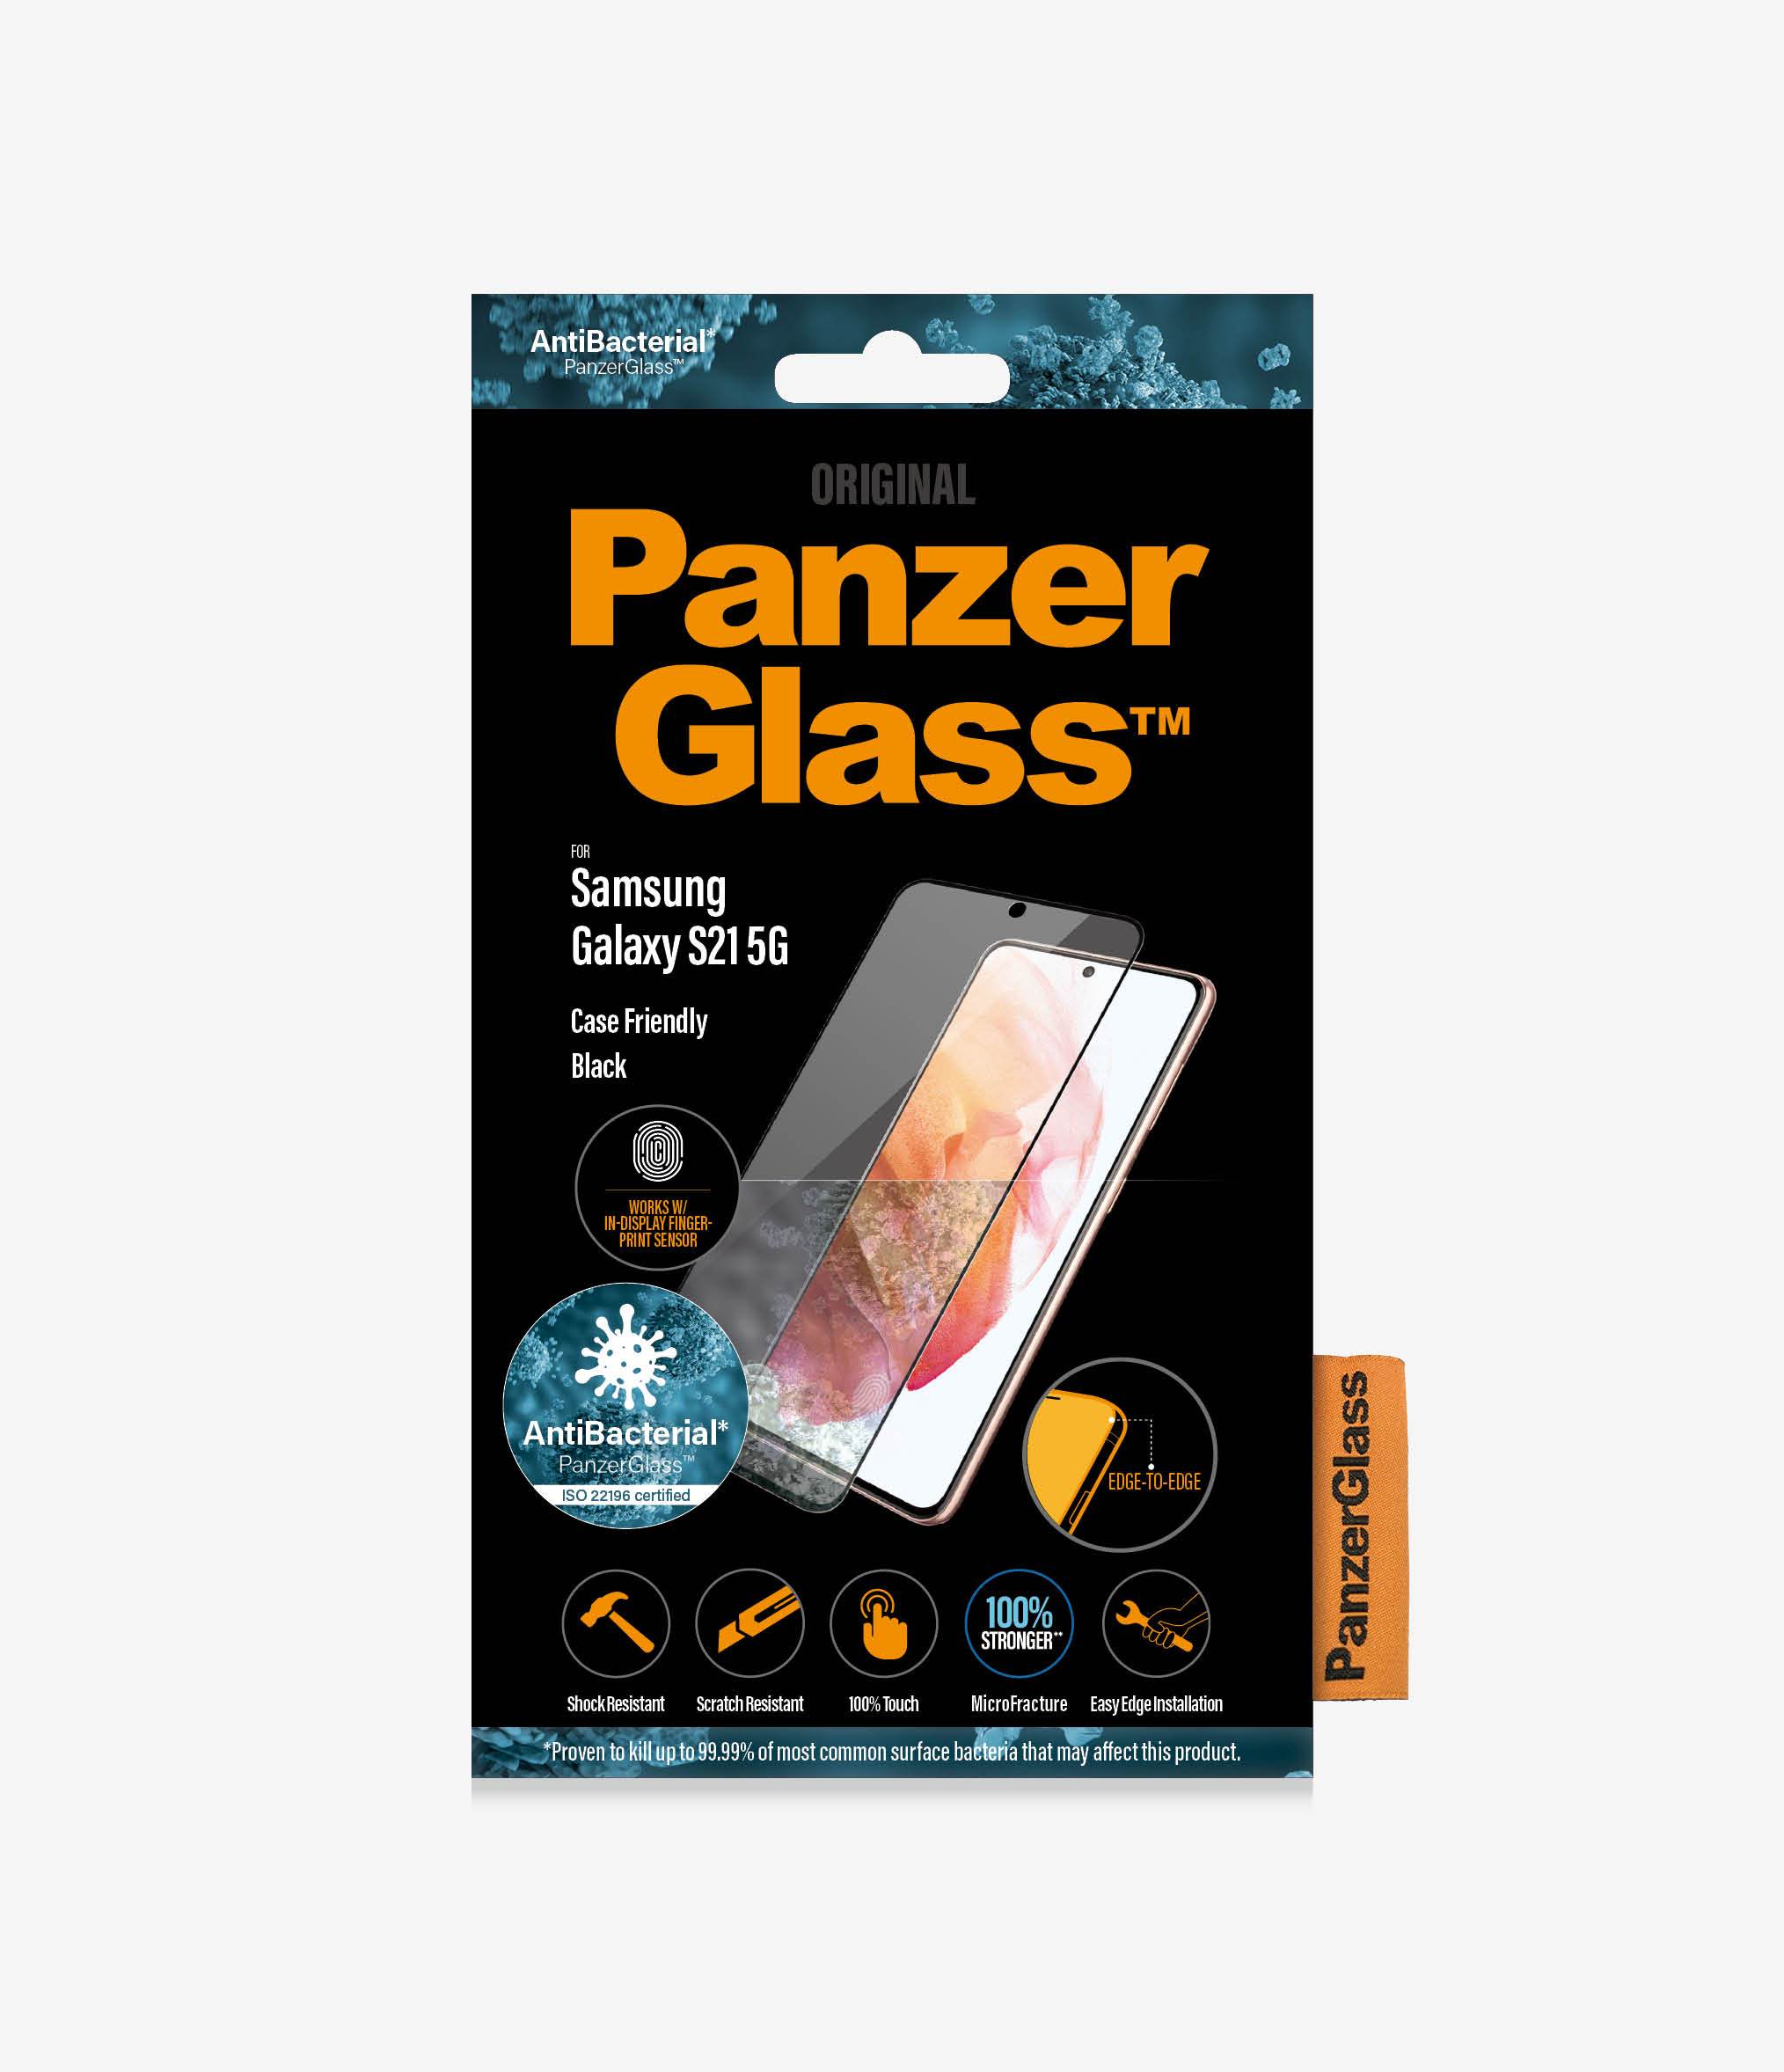 PanzerGlass™ Samsung Galaxy S21 - Clear Glass (7256) - Screen Protector - Full frame coverage, Rounded edges, Crystal clear, 100% touch preservation